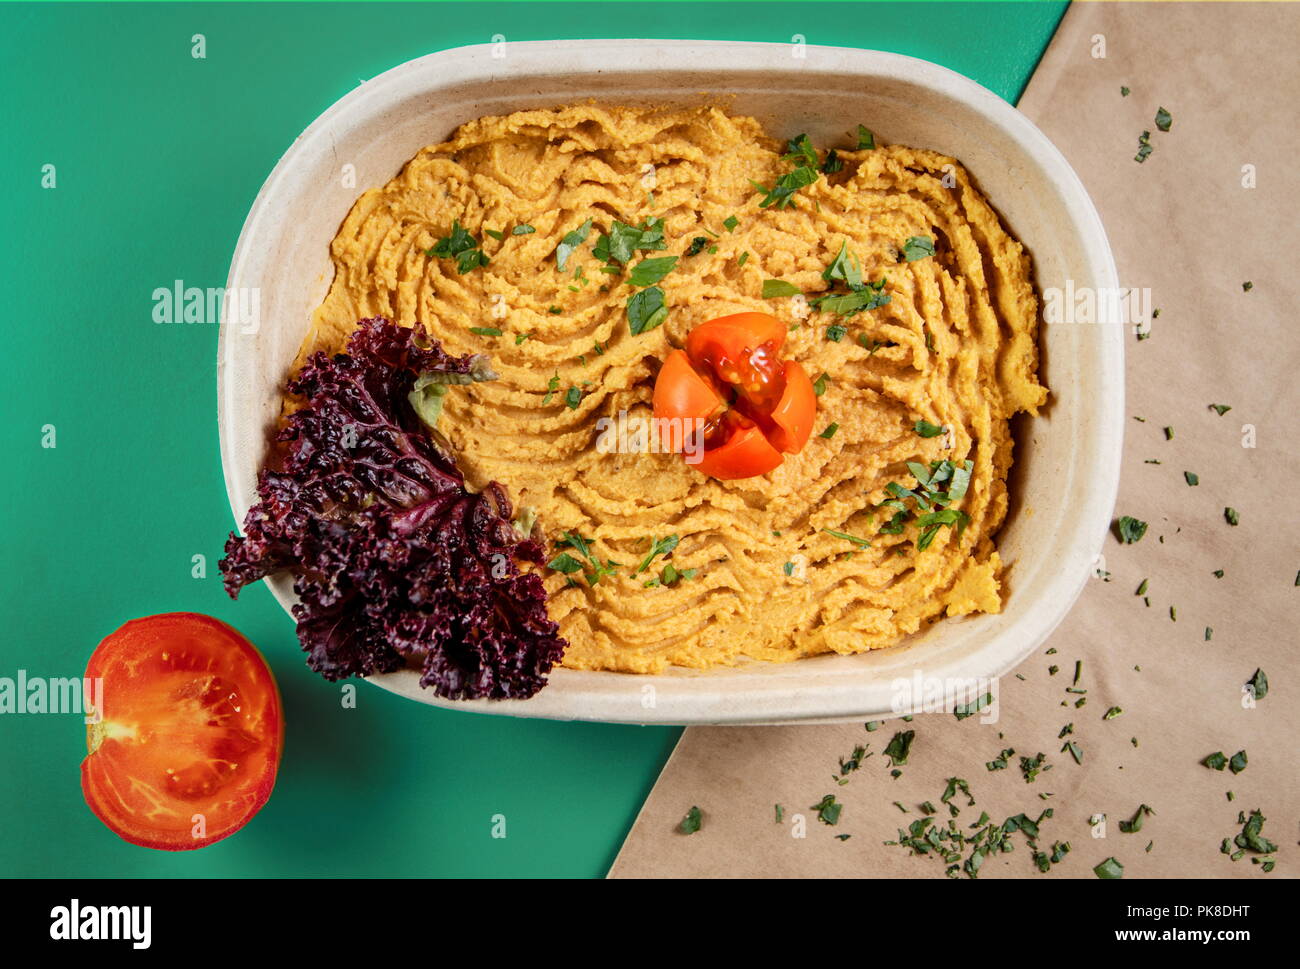 Hummus  recipe arranged in cardboard packaging, on green background and wrapping paper Stock Photo